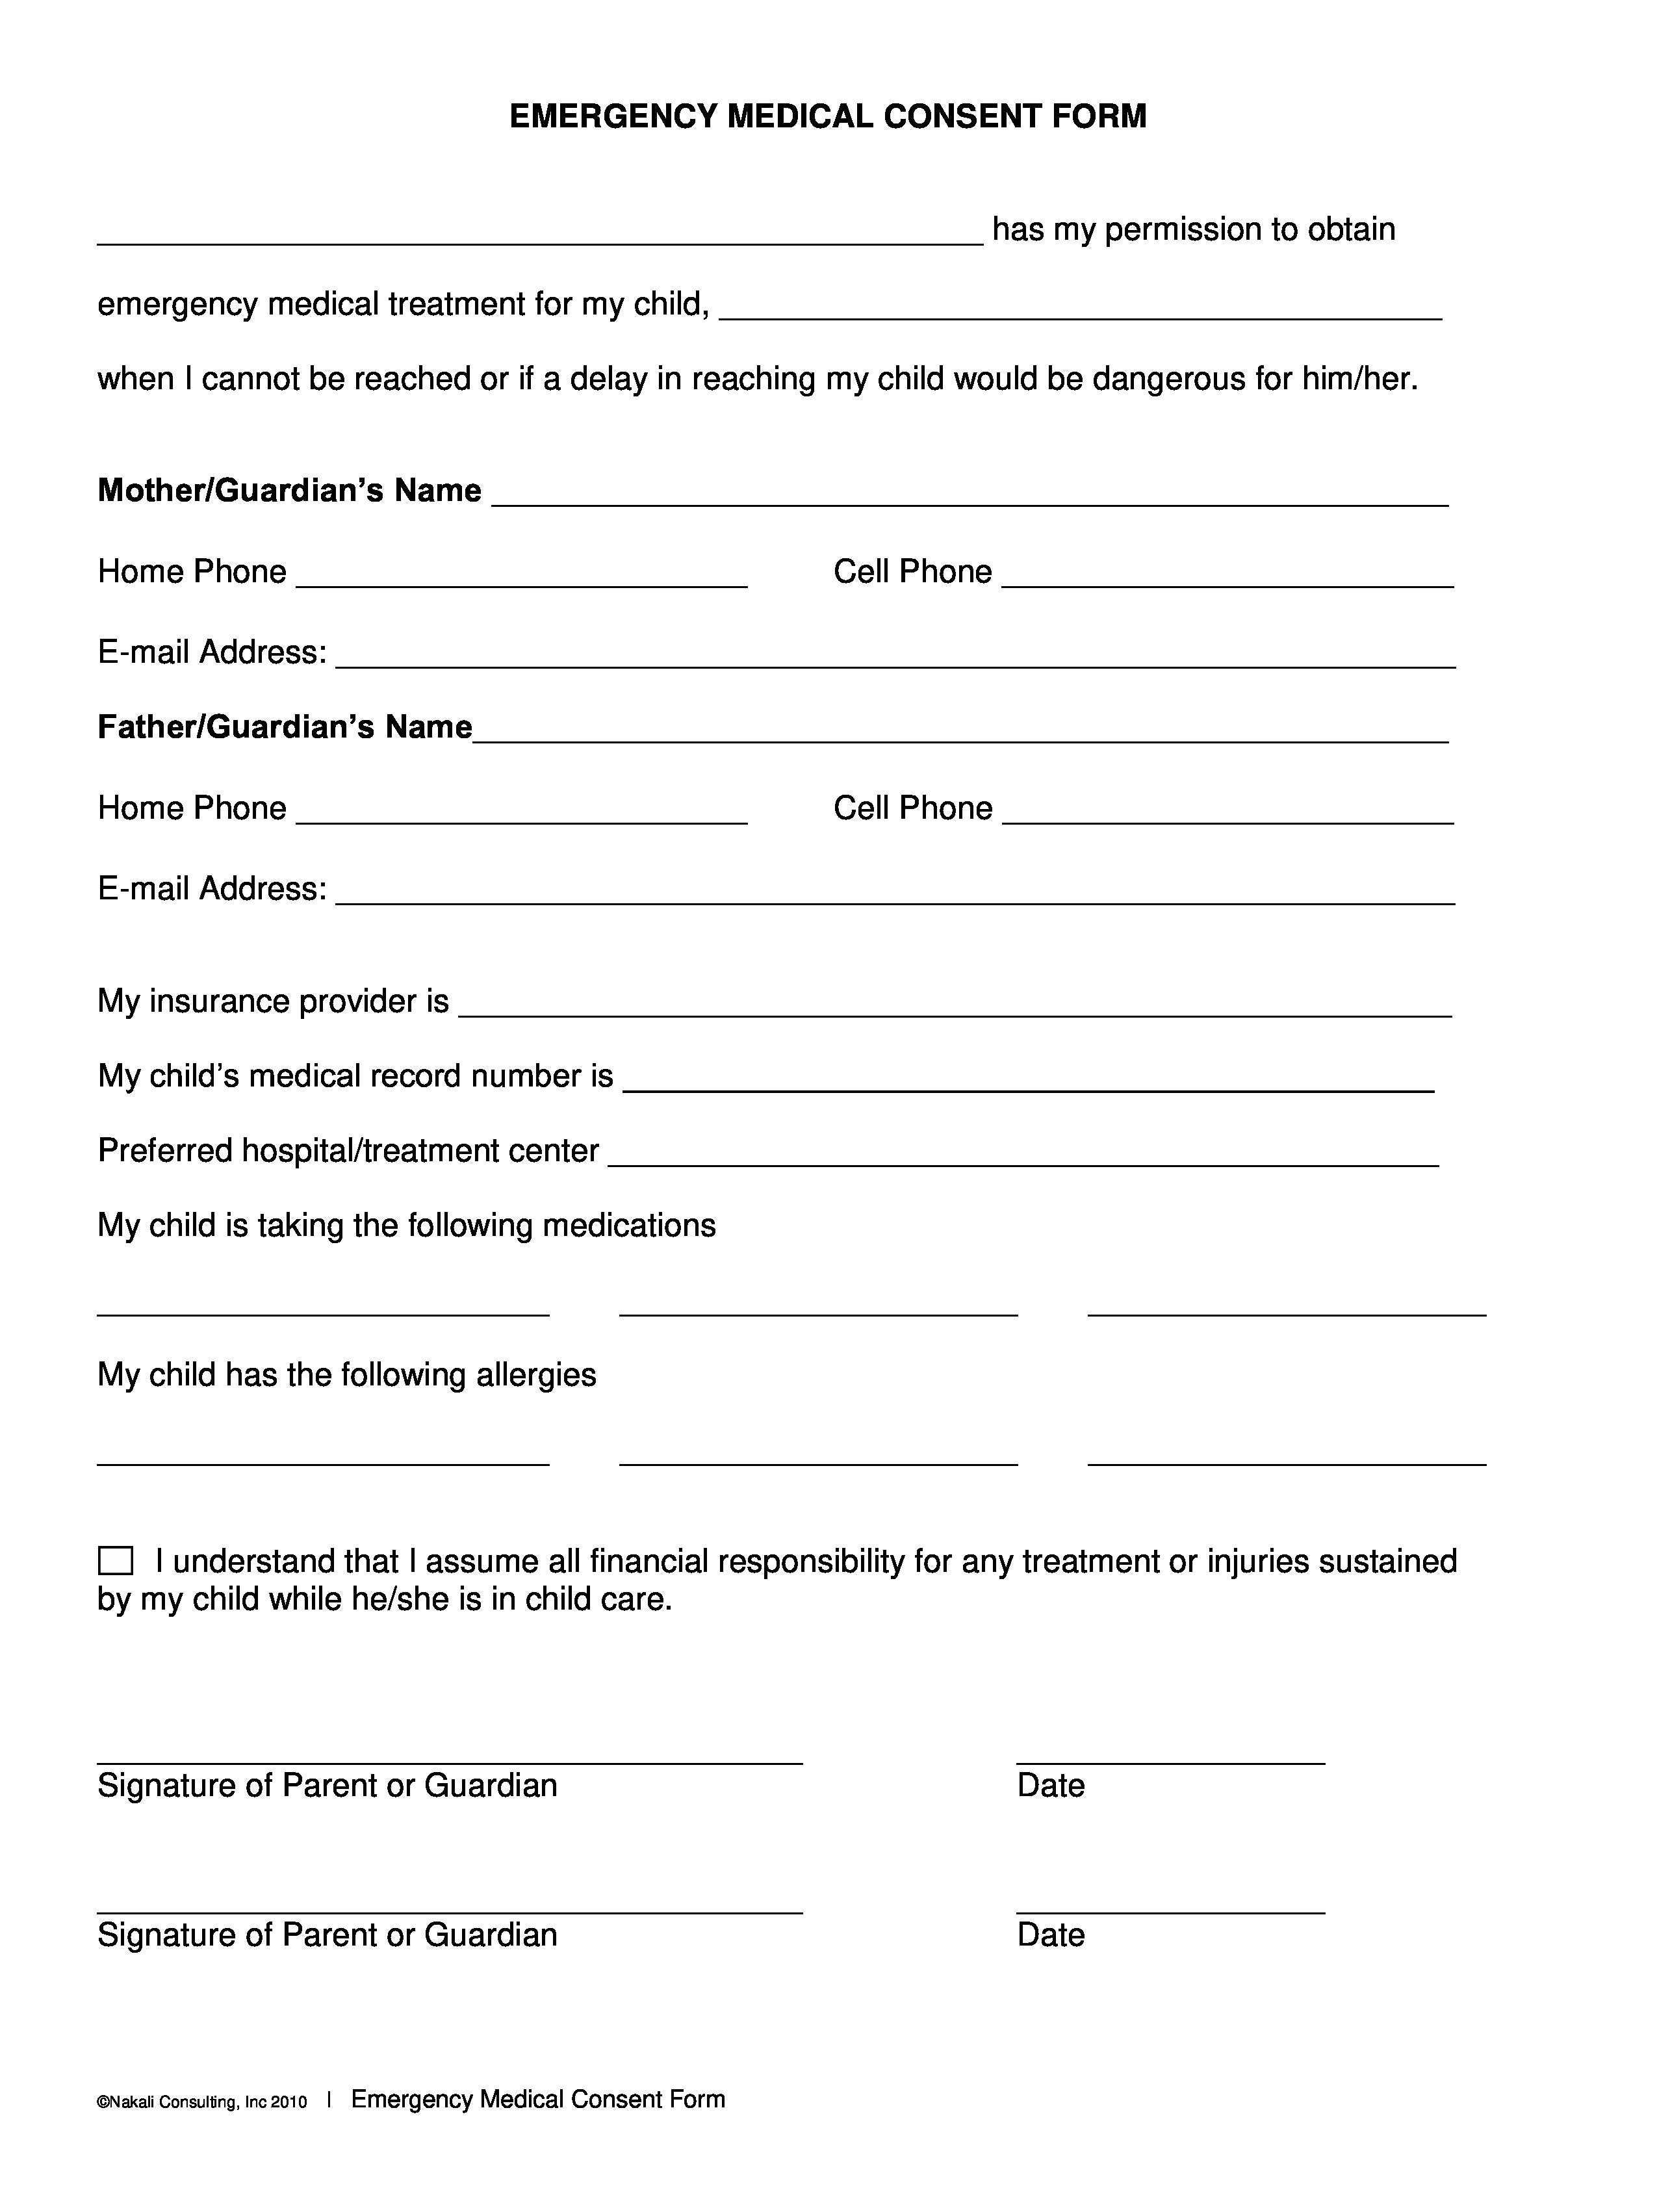 Free Medical Emergency Consent form